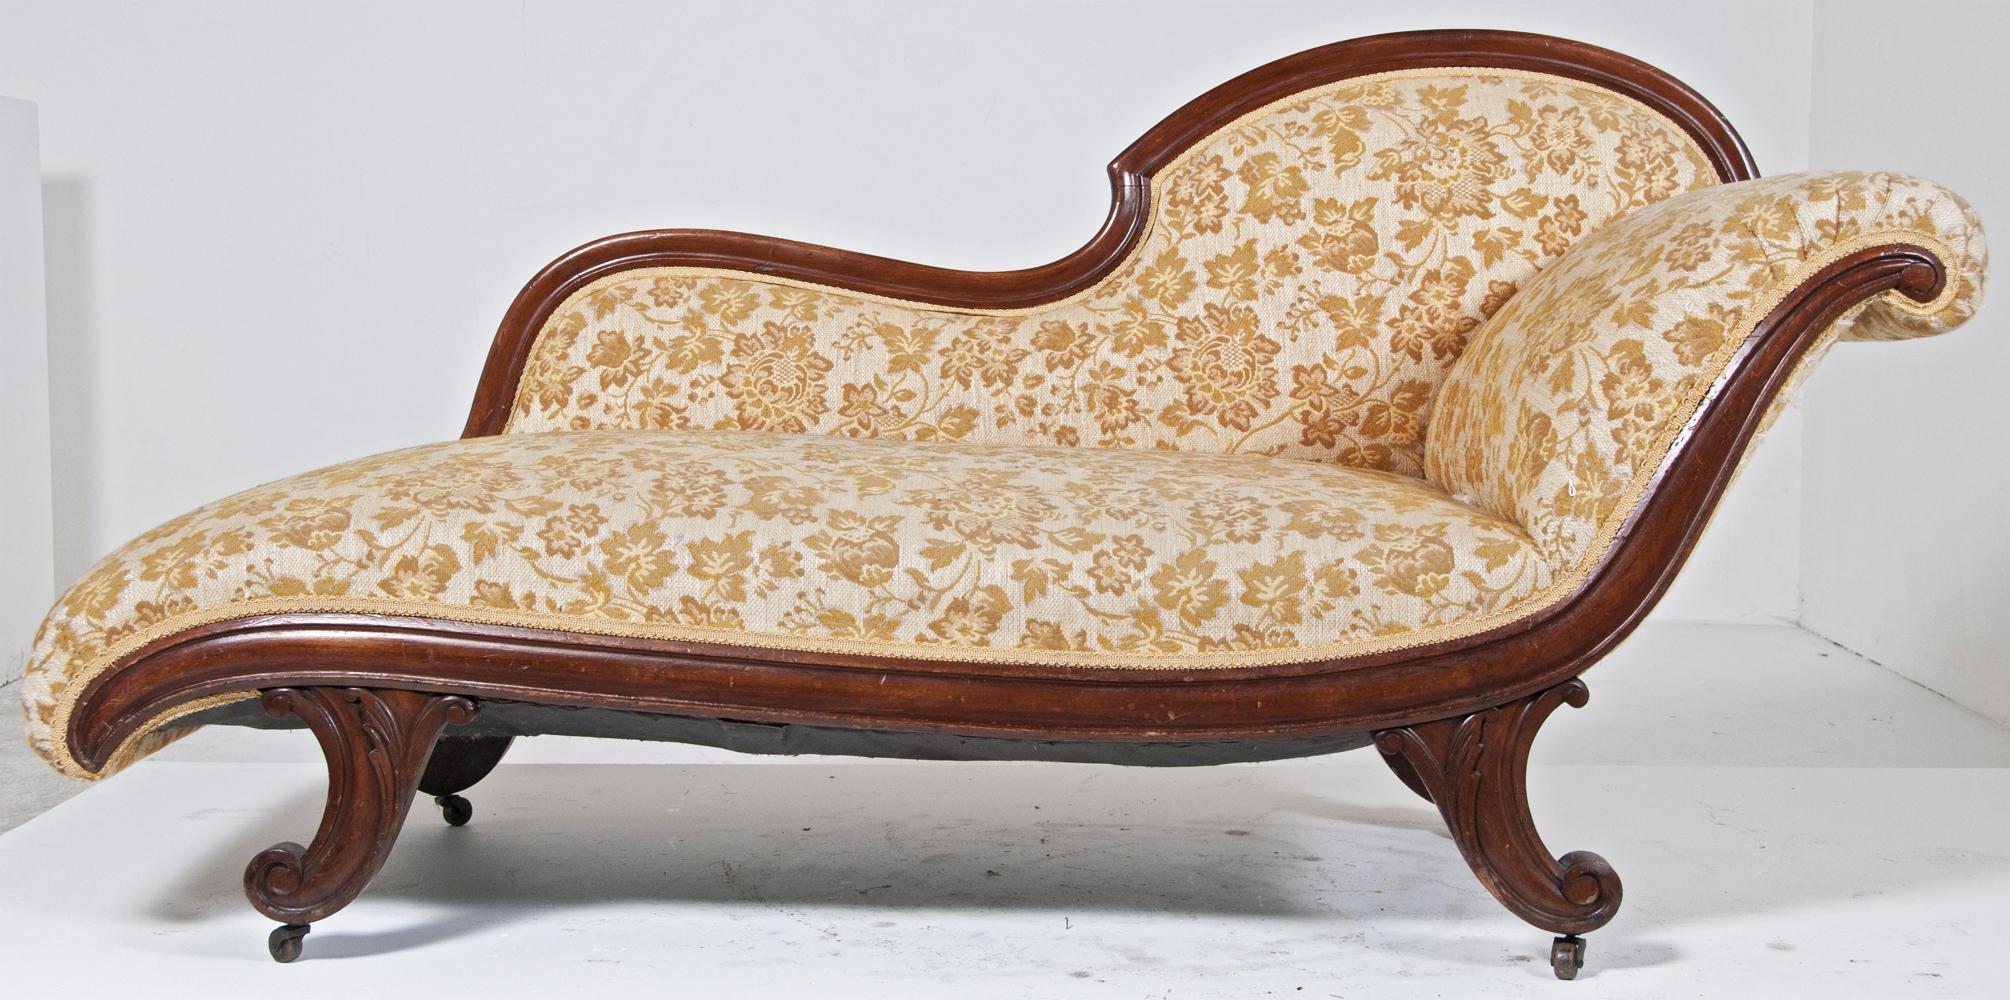 Recamiere from the 19th century - fainting couch - Image 4 of 9 ILTUMXO